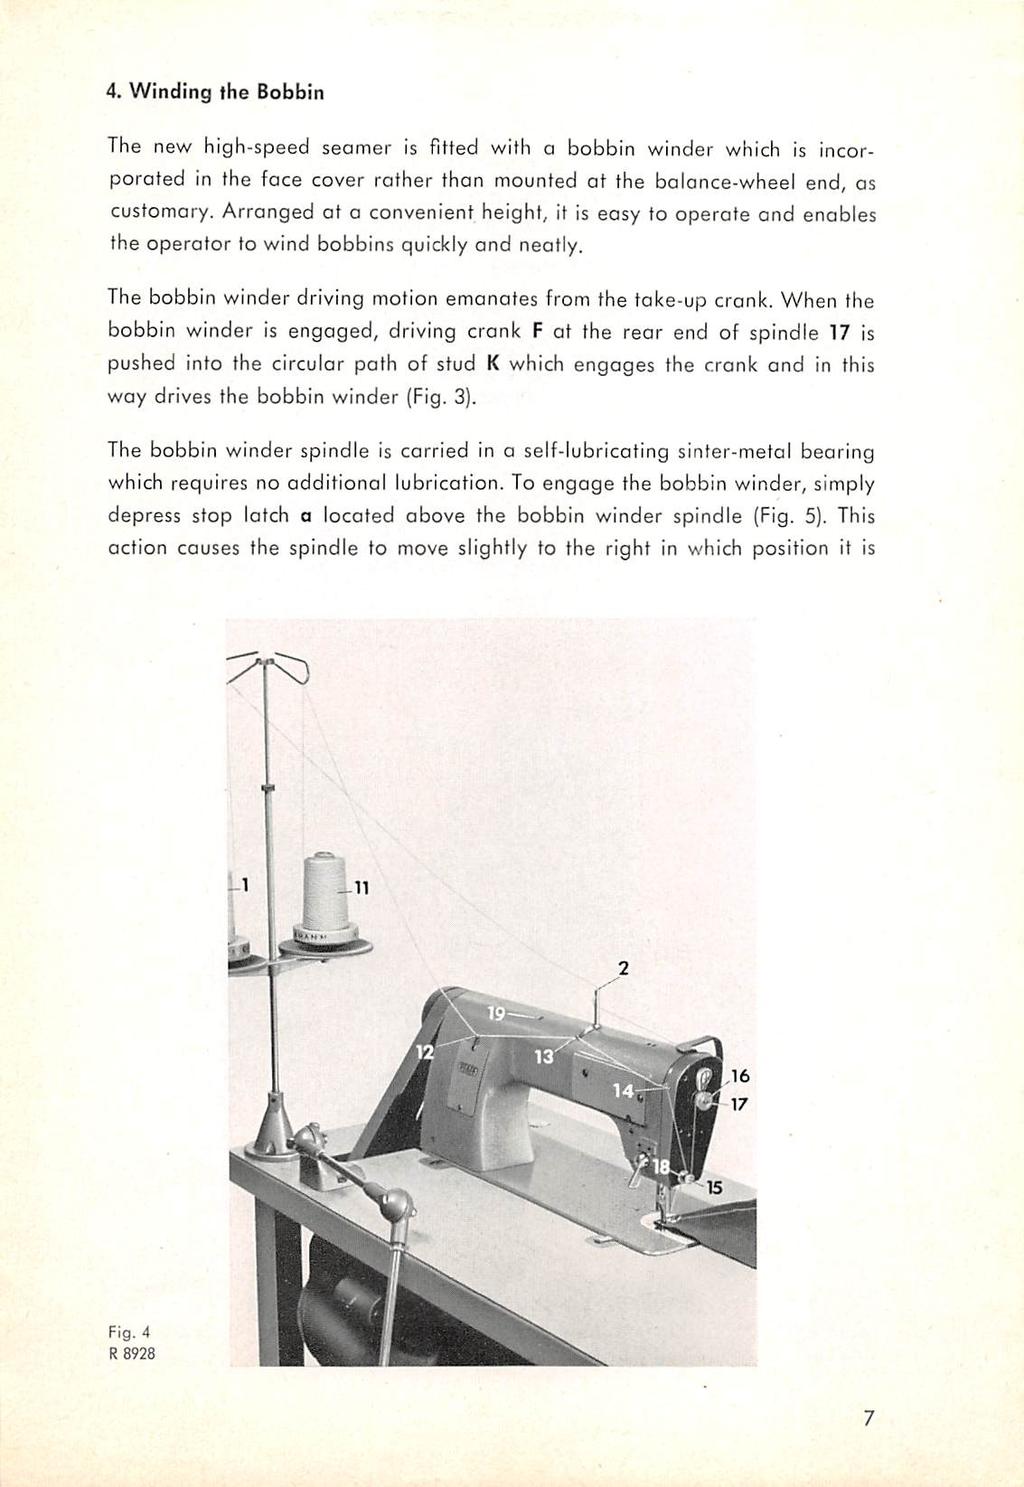 4. Winding the Bobbin The new high-speed seamer is fitted with a bobbin winder which is incor porated in the face cover rother than mounted at the balance-wheel end, as customary.